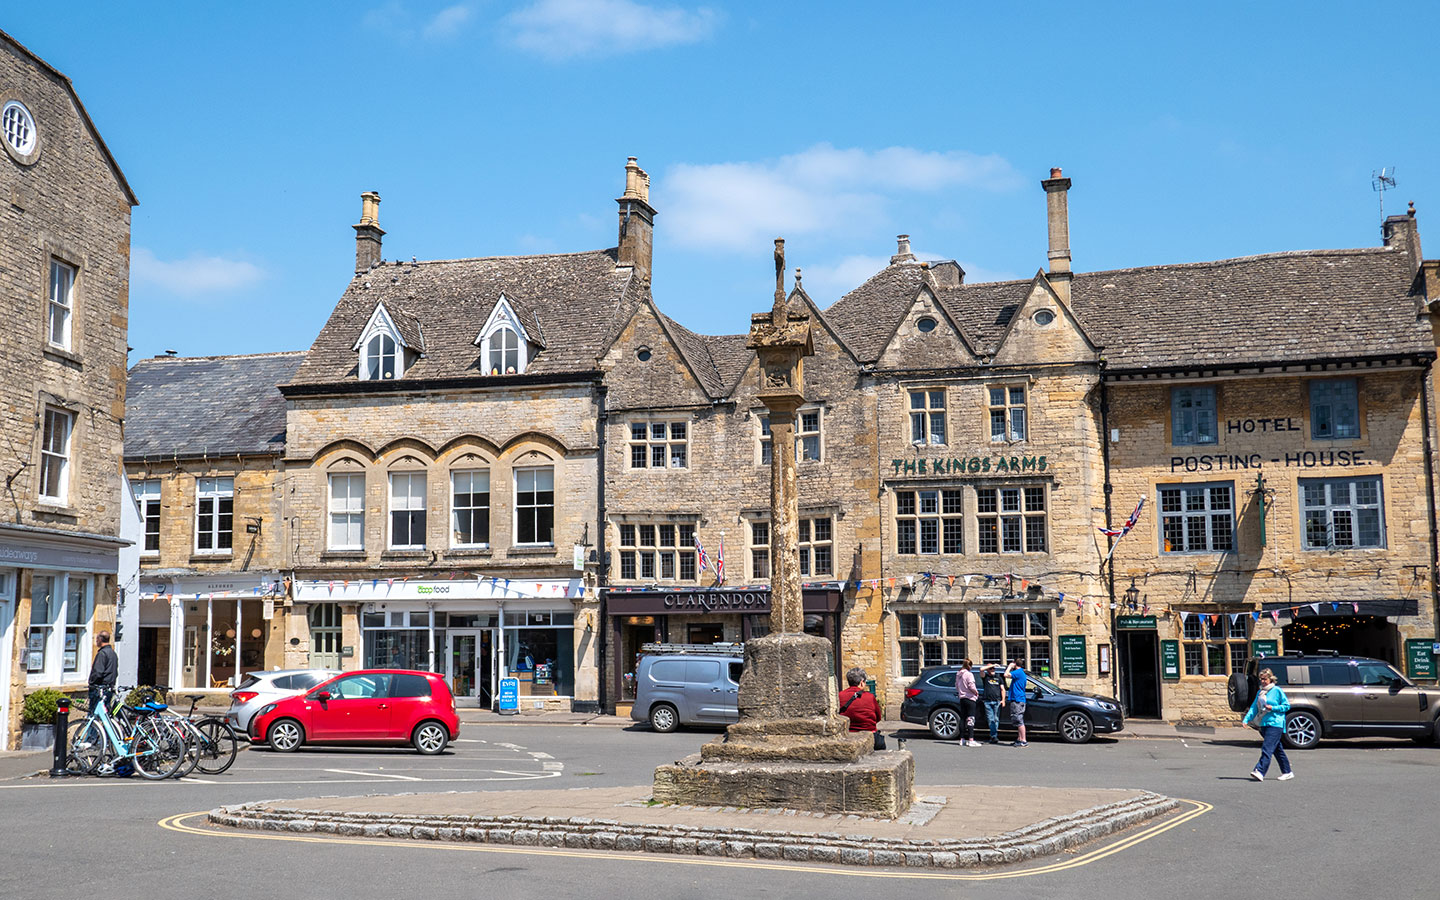 Stow-on-the-Wold's Market Square